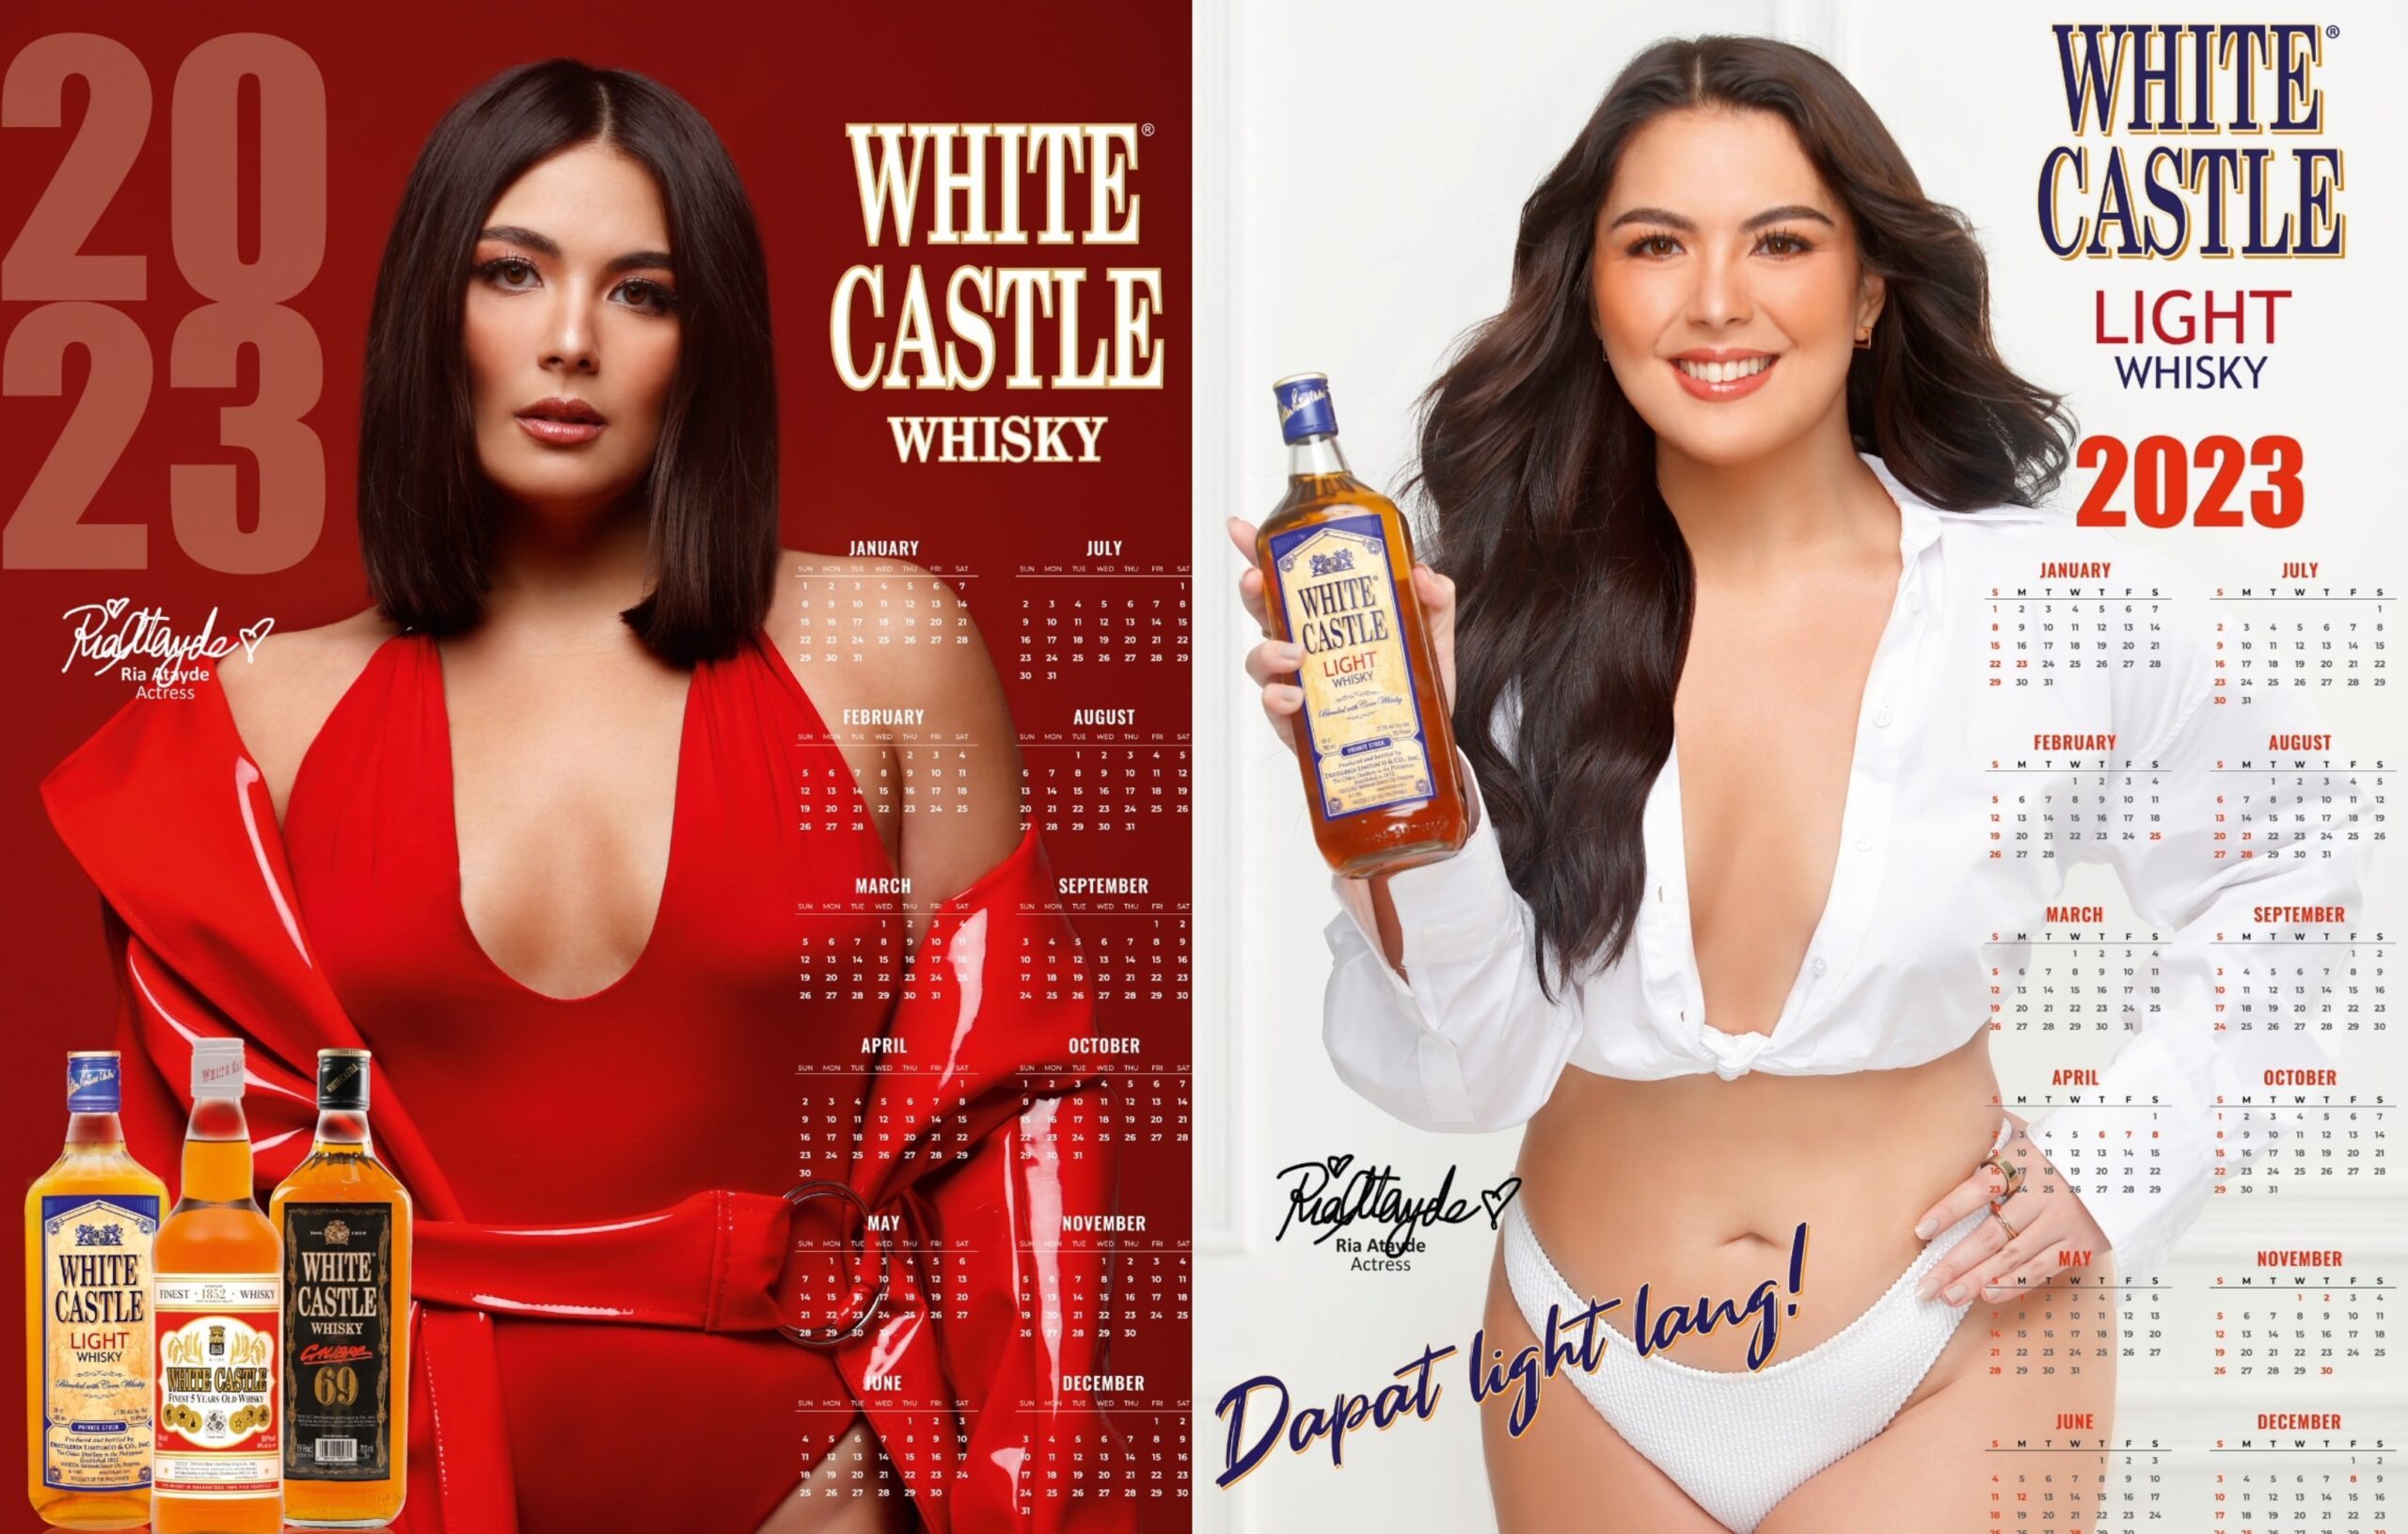 ‘Beauty goes in all forms and sizes’ Ria Atayde is White Castle Whisky